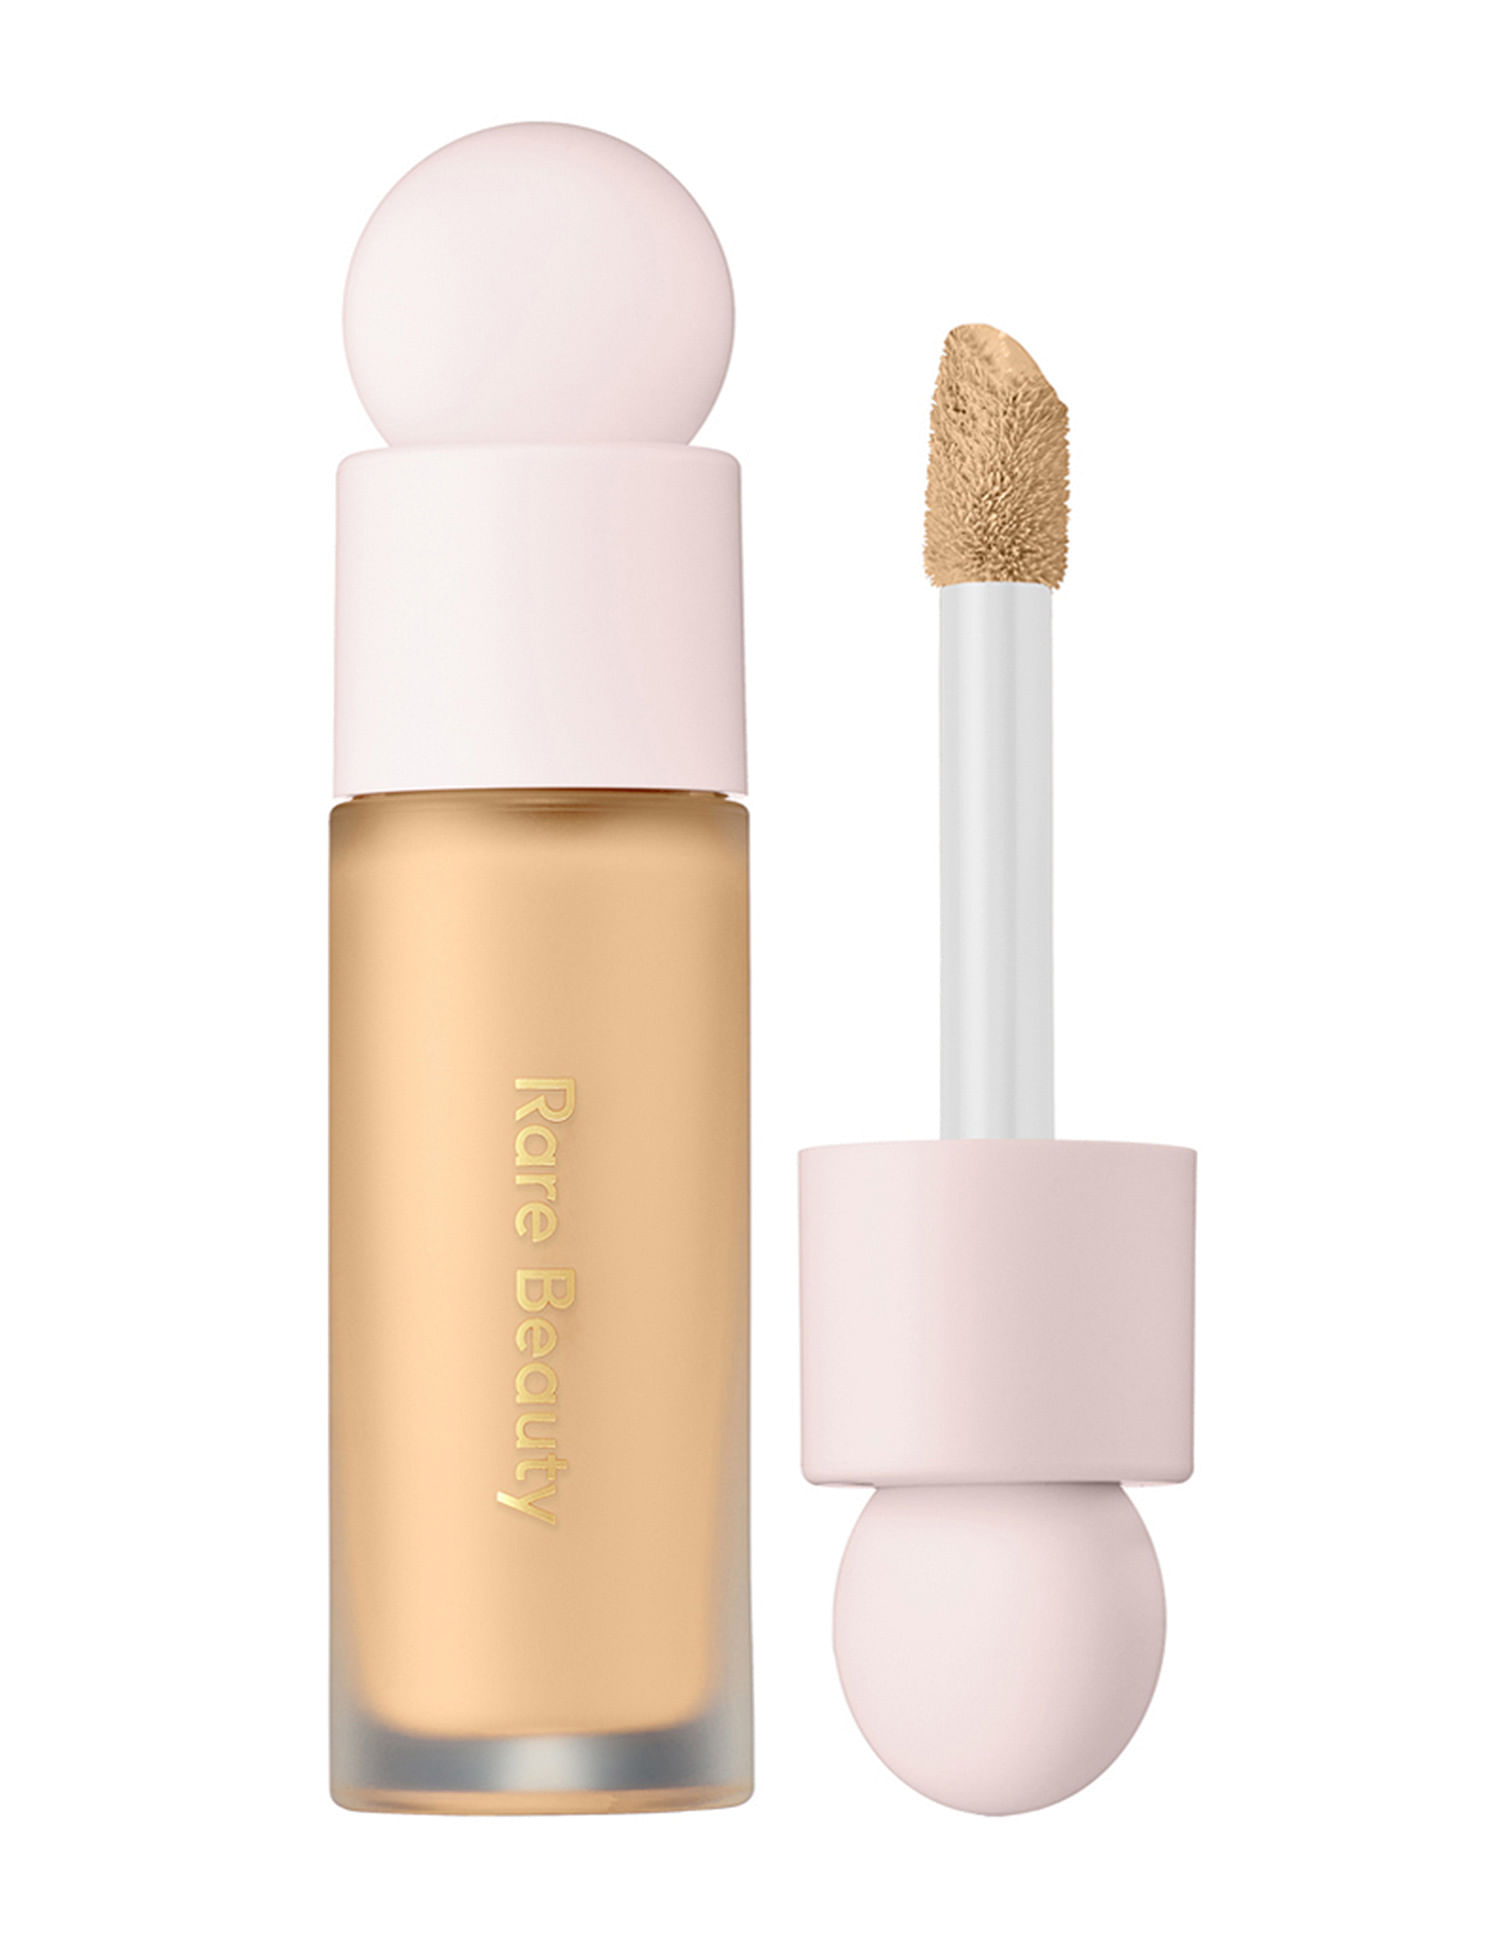 Buy Rare Beauty Liquid Touch Brightening Concealer - 190W - NNNOW.com